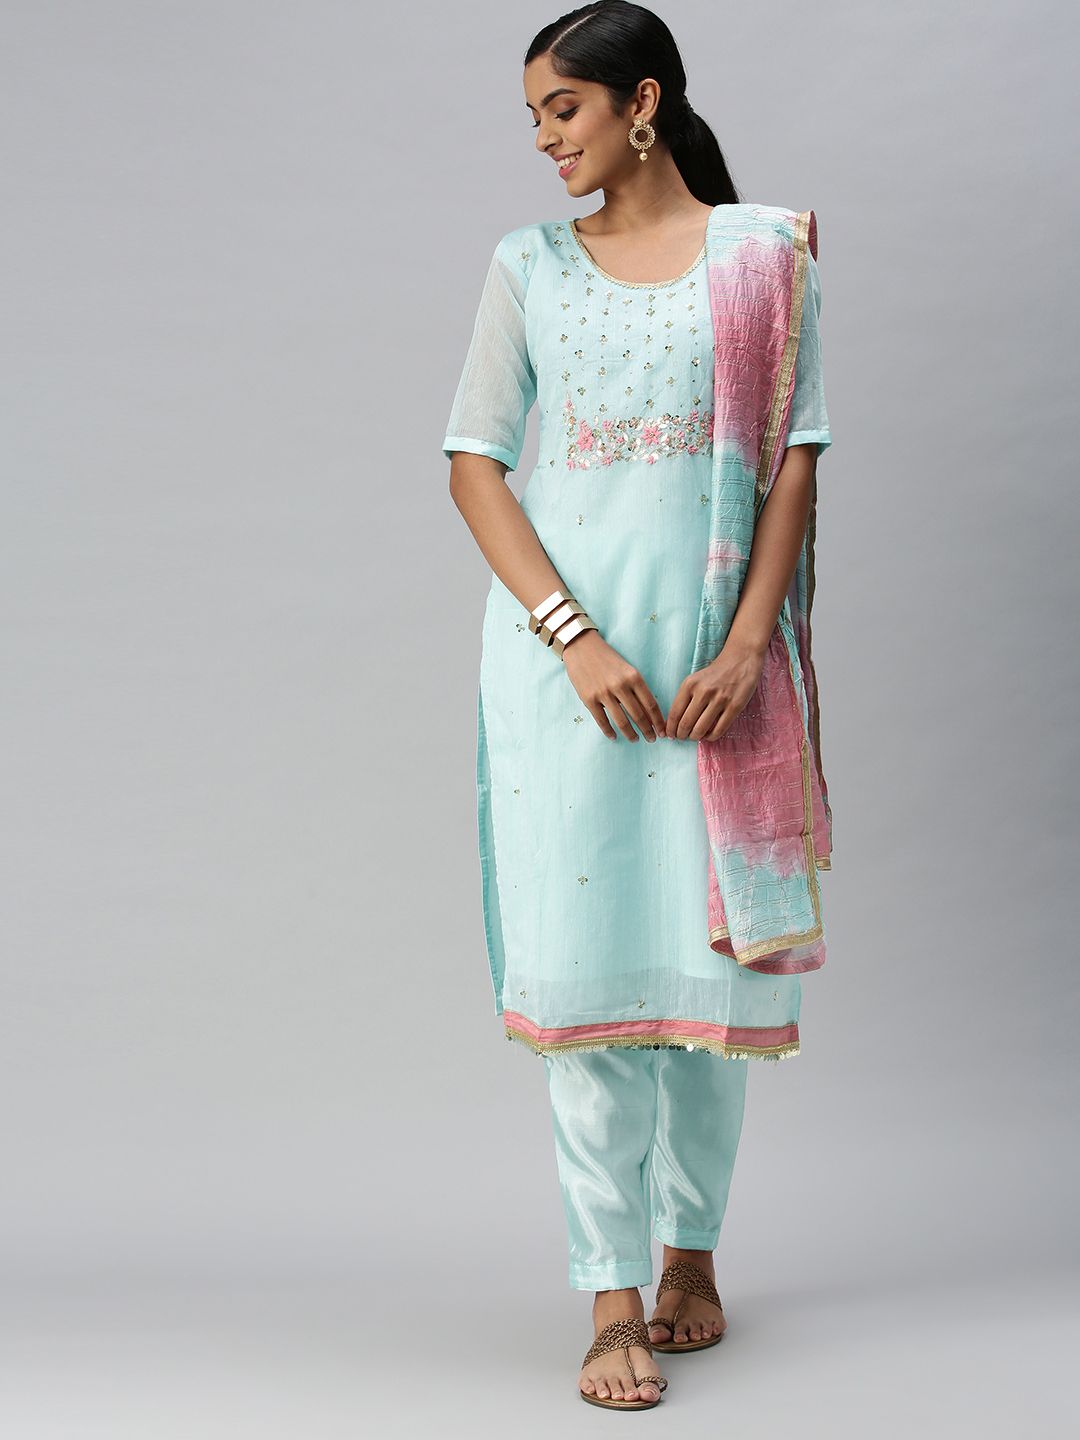 Blissta Blue & Pink Embellished Unstitched Dress Material Price in India